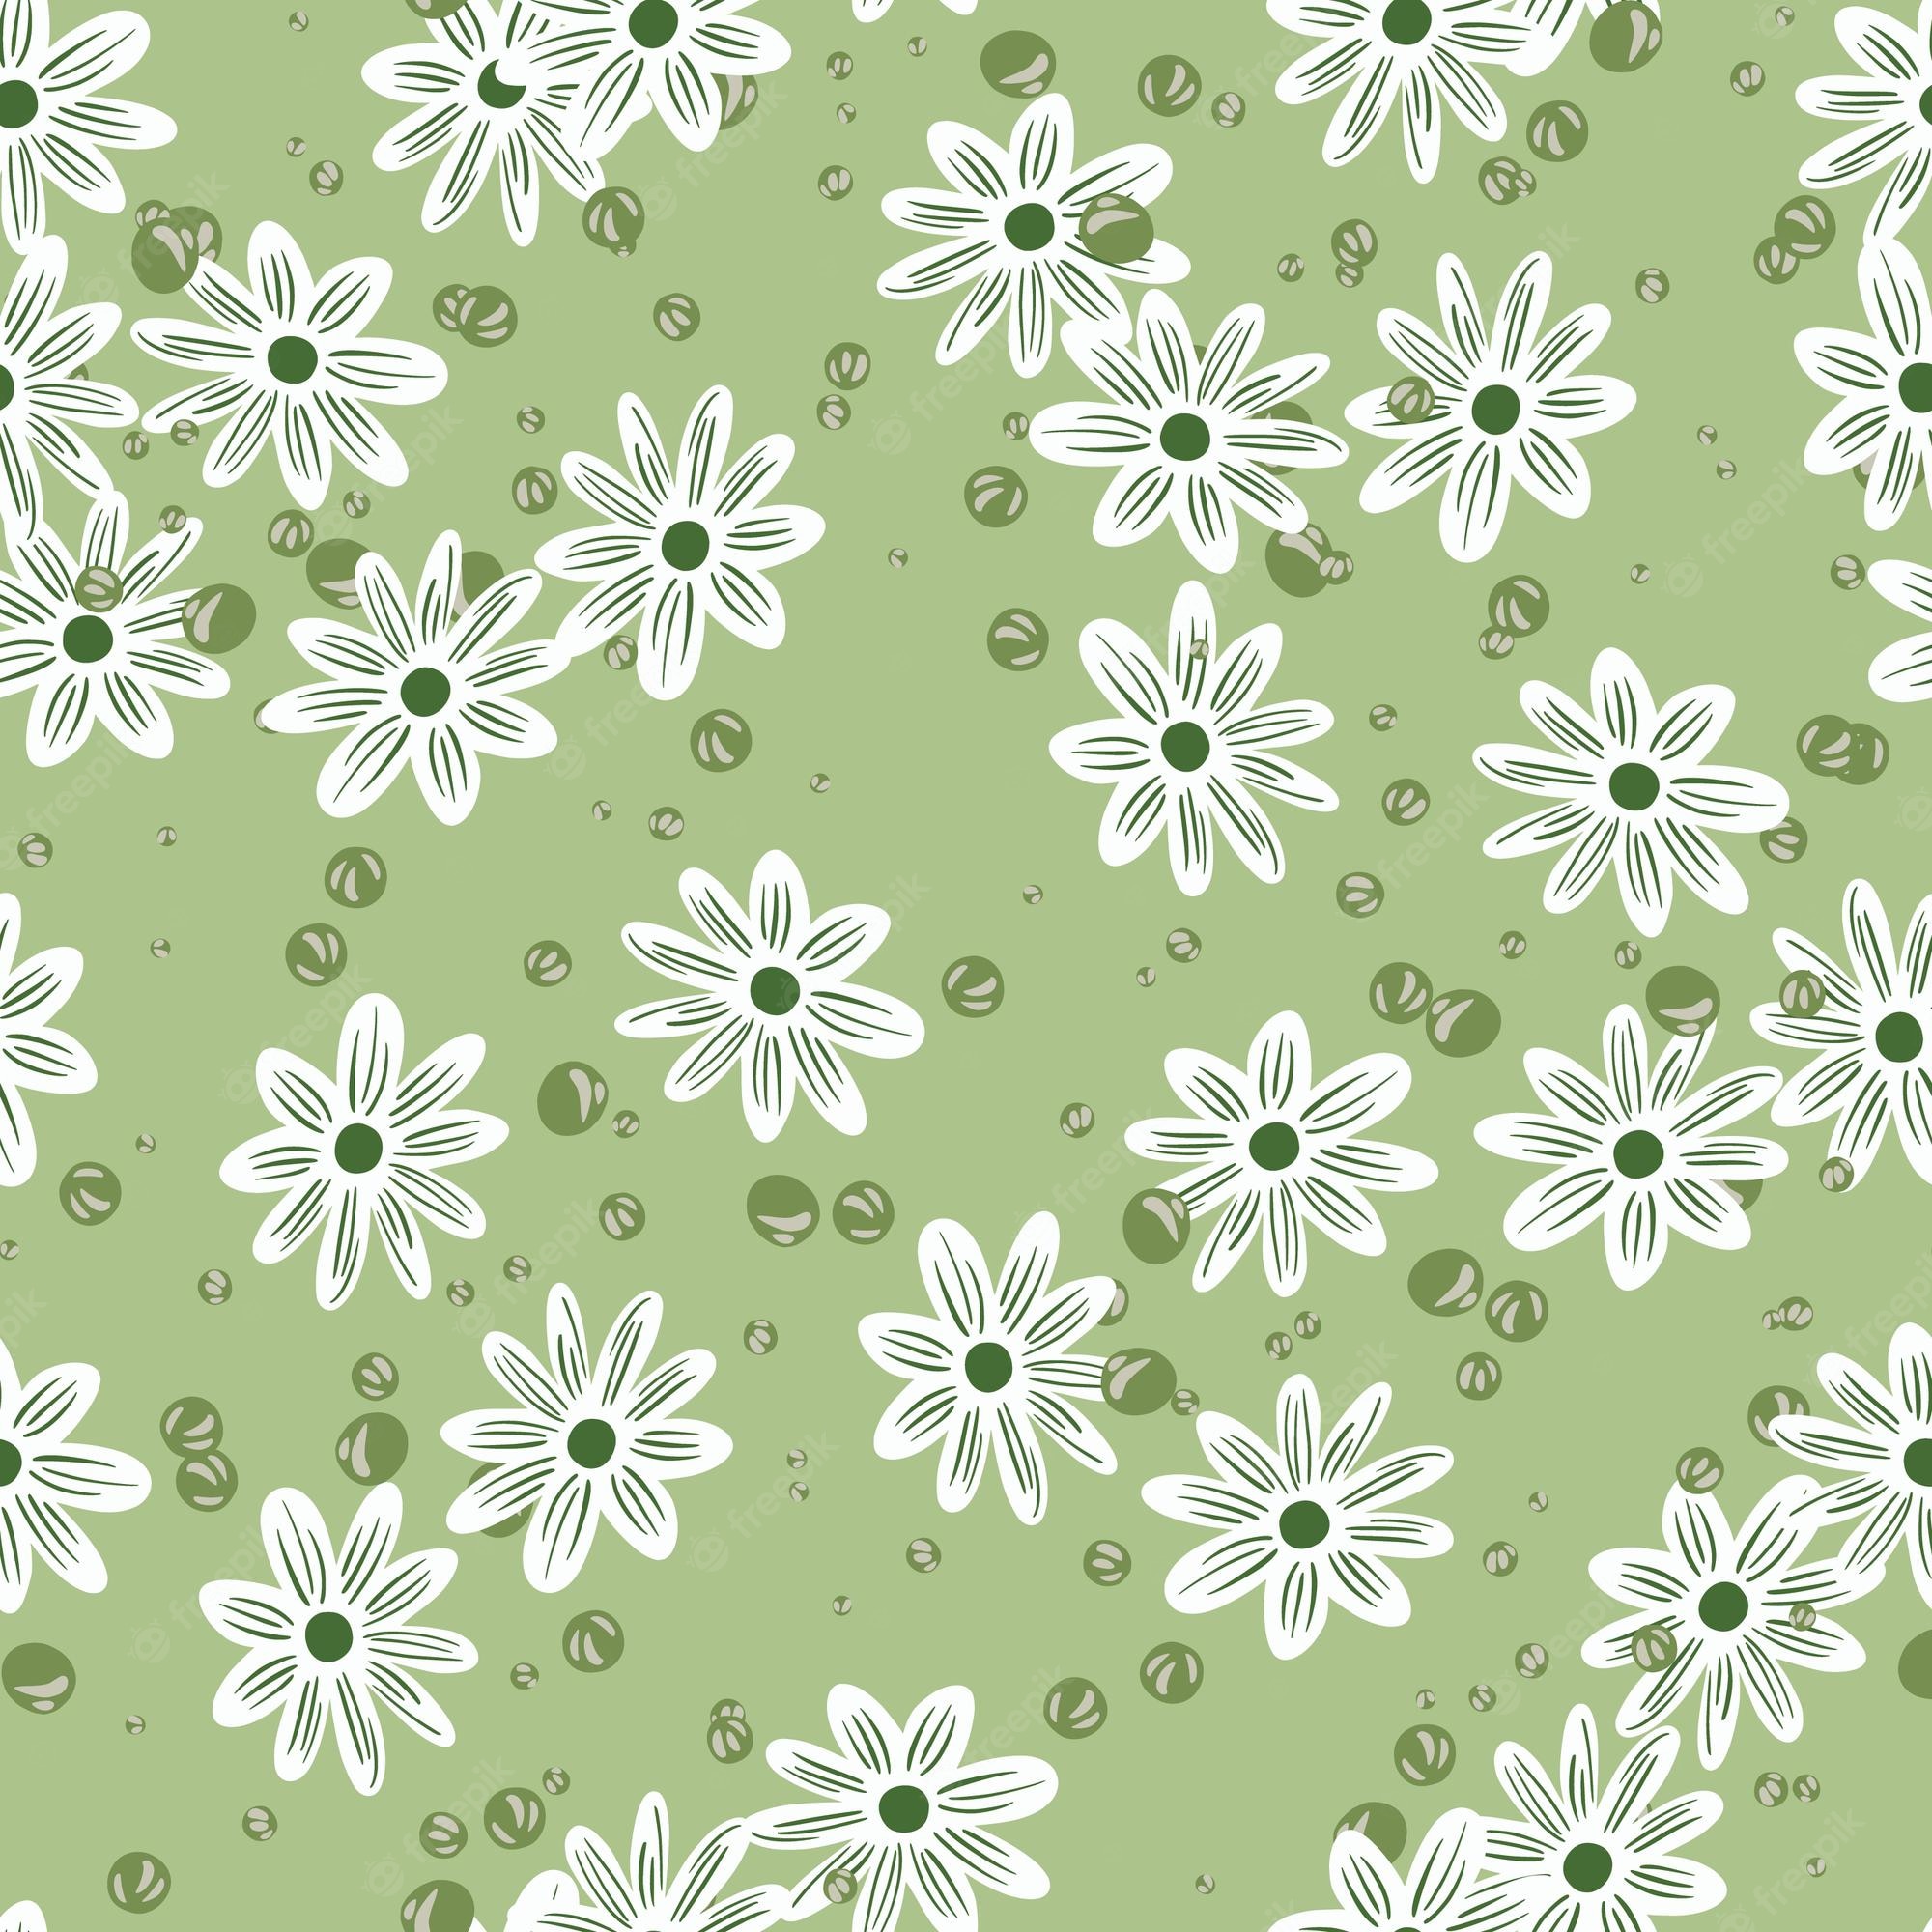 Premium Vector. Hand drawn spring seamless pattern with random white flowers shapes. pastel green background with bubbles. flat vector print for textile, fabric, giftwrap, wallpaper. endless illustration